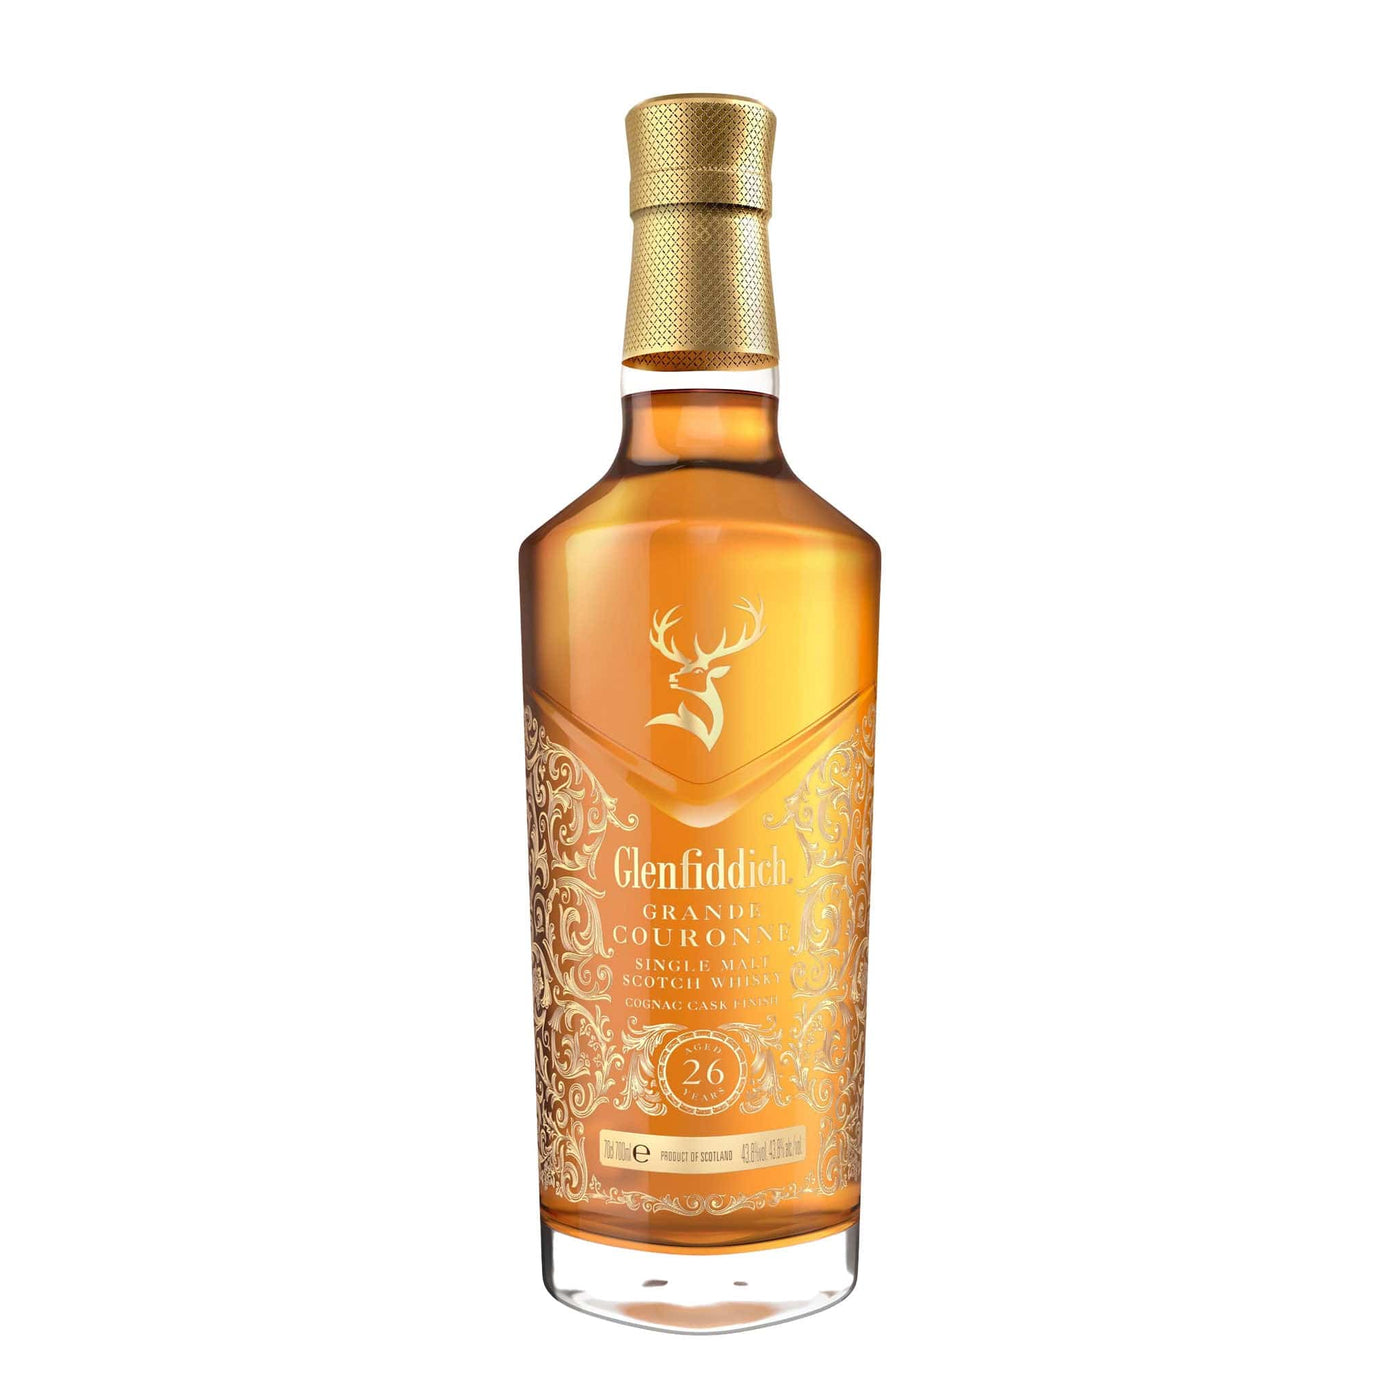 Glenfiddich 26 Years Grand Couronne Artist Edition Whisky